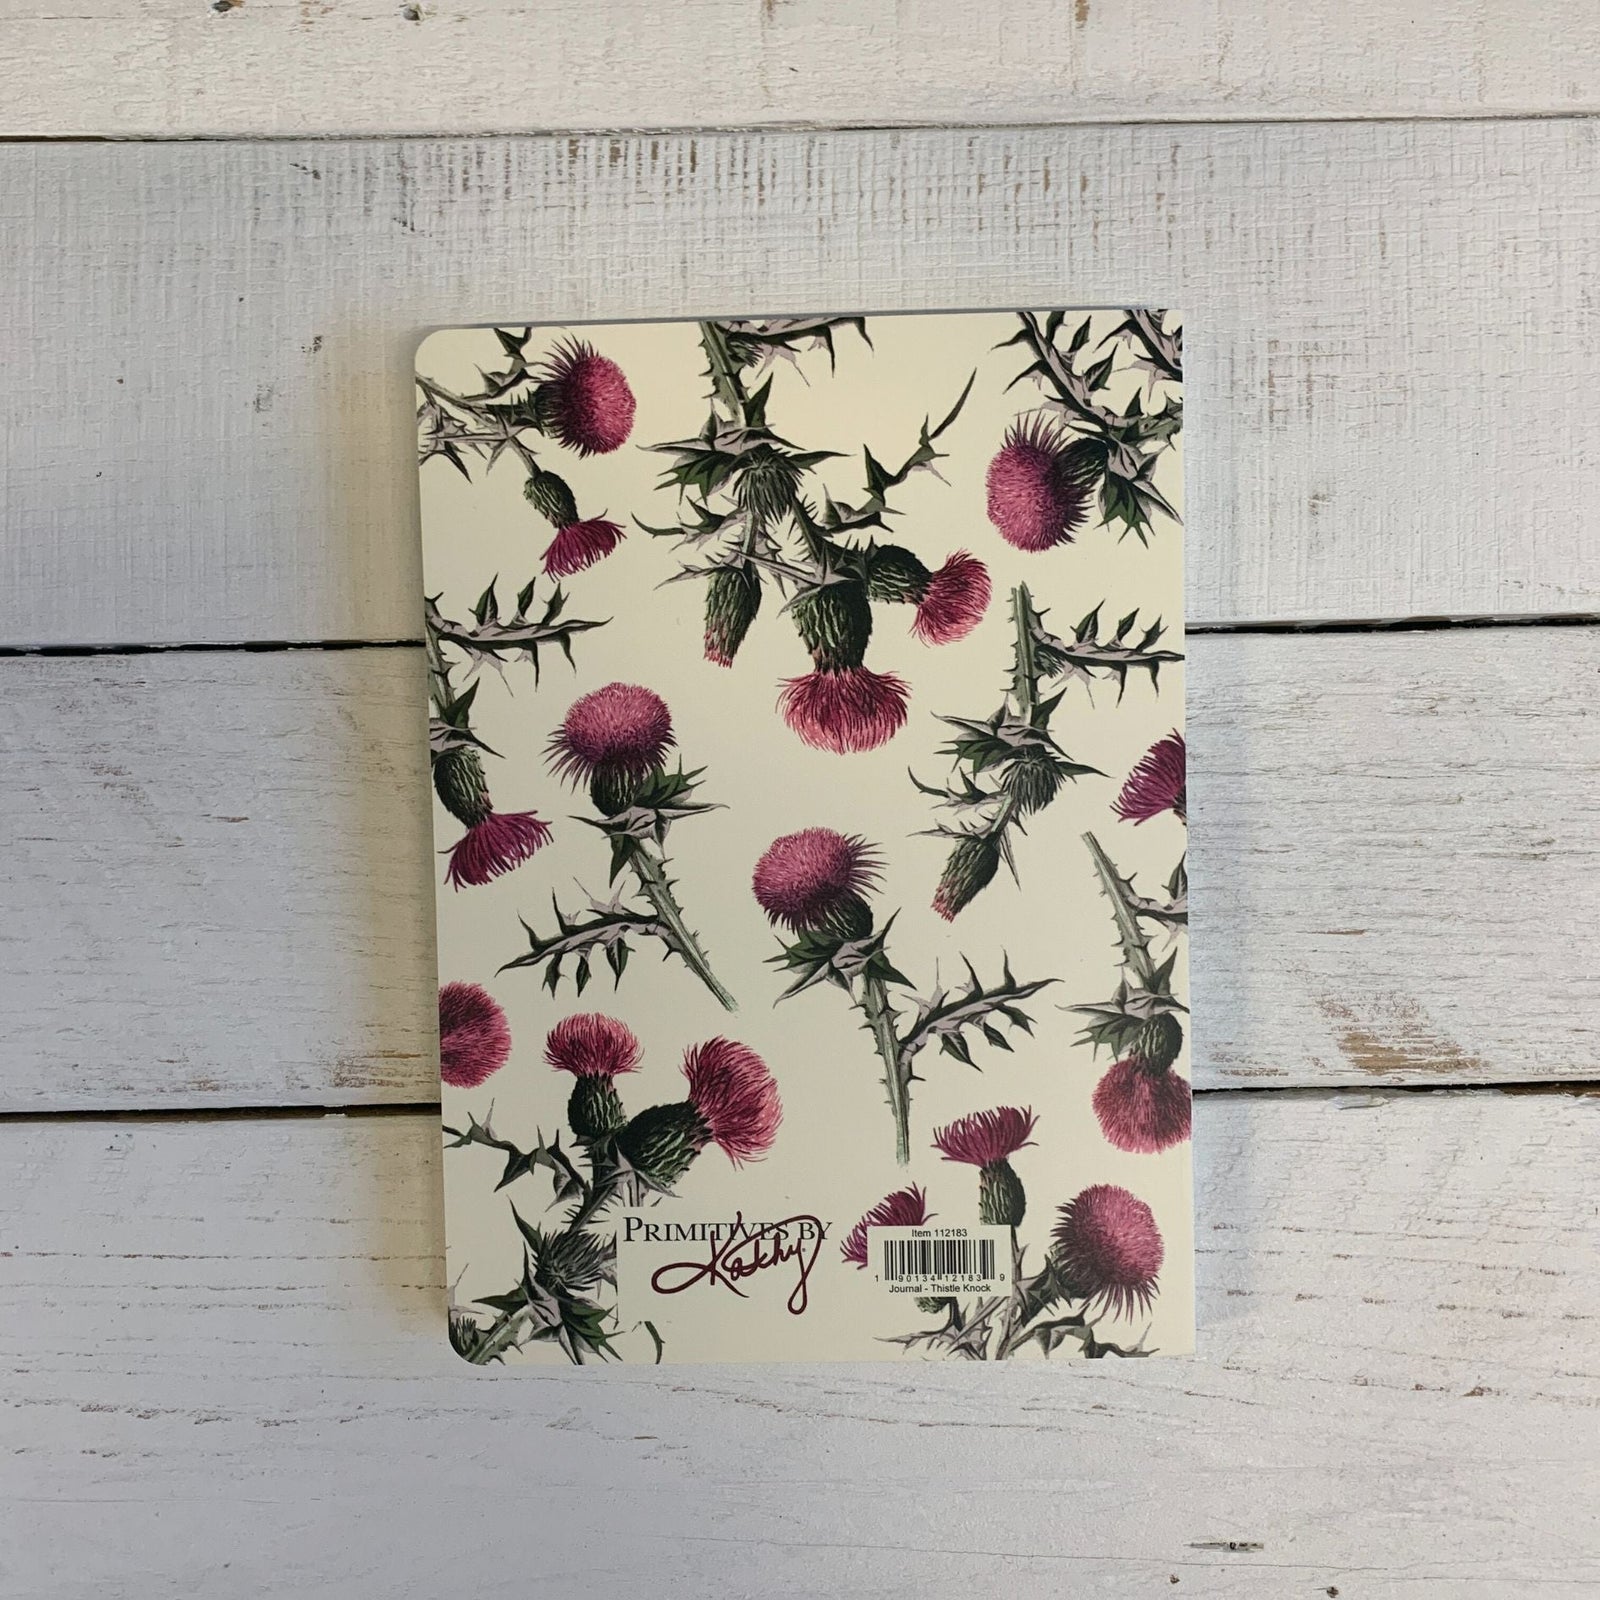 Deal of the Day: Thistle Knock Your Socks Off Double-Sided Journal | 160 Lined Pages Notebook